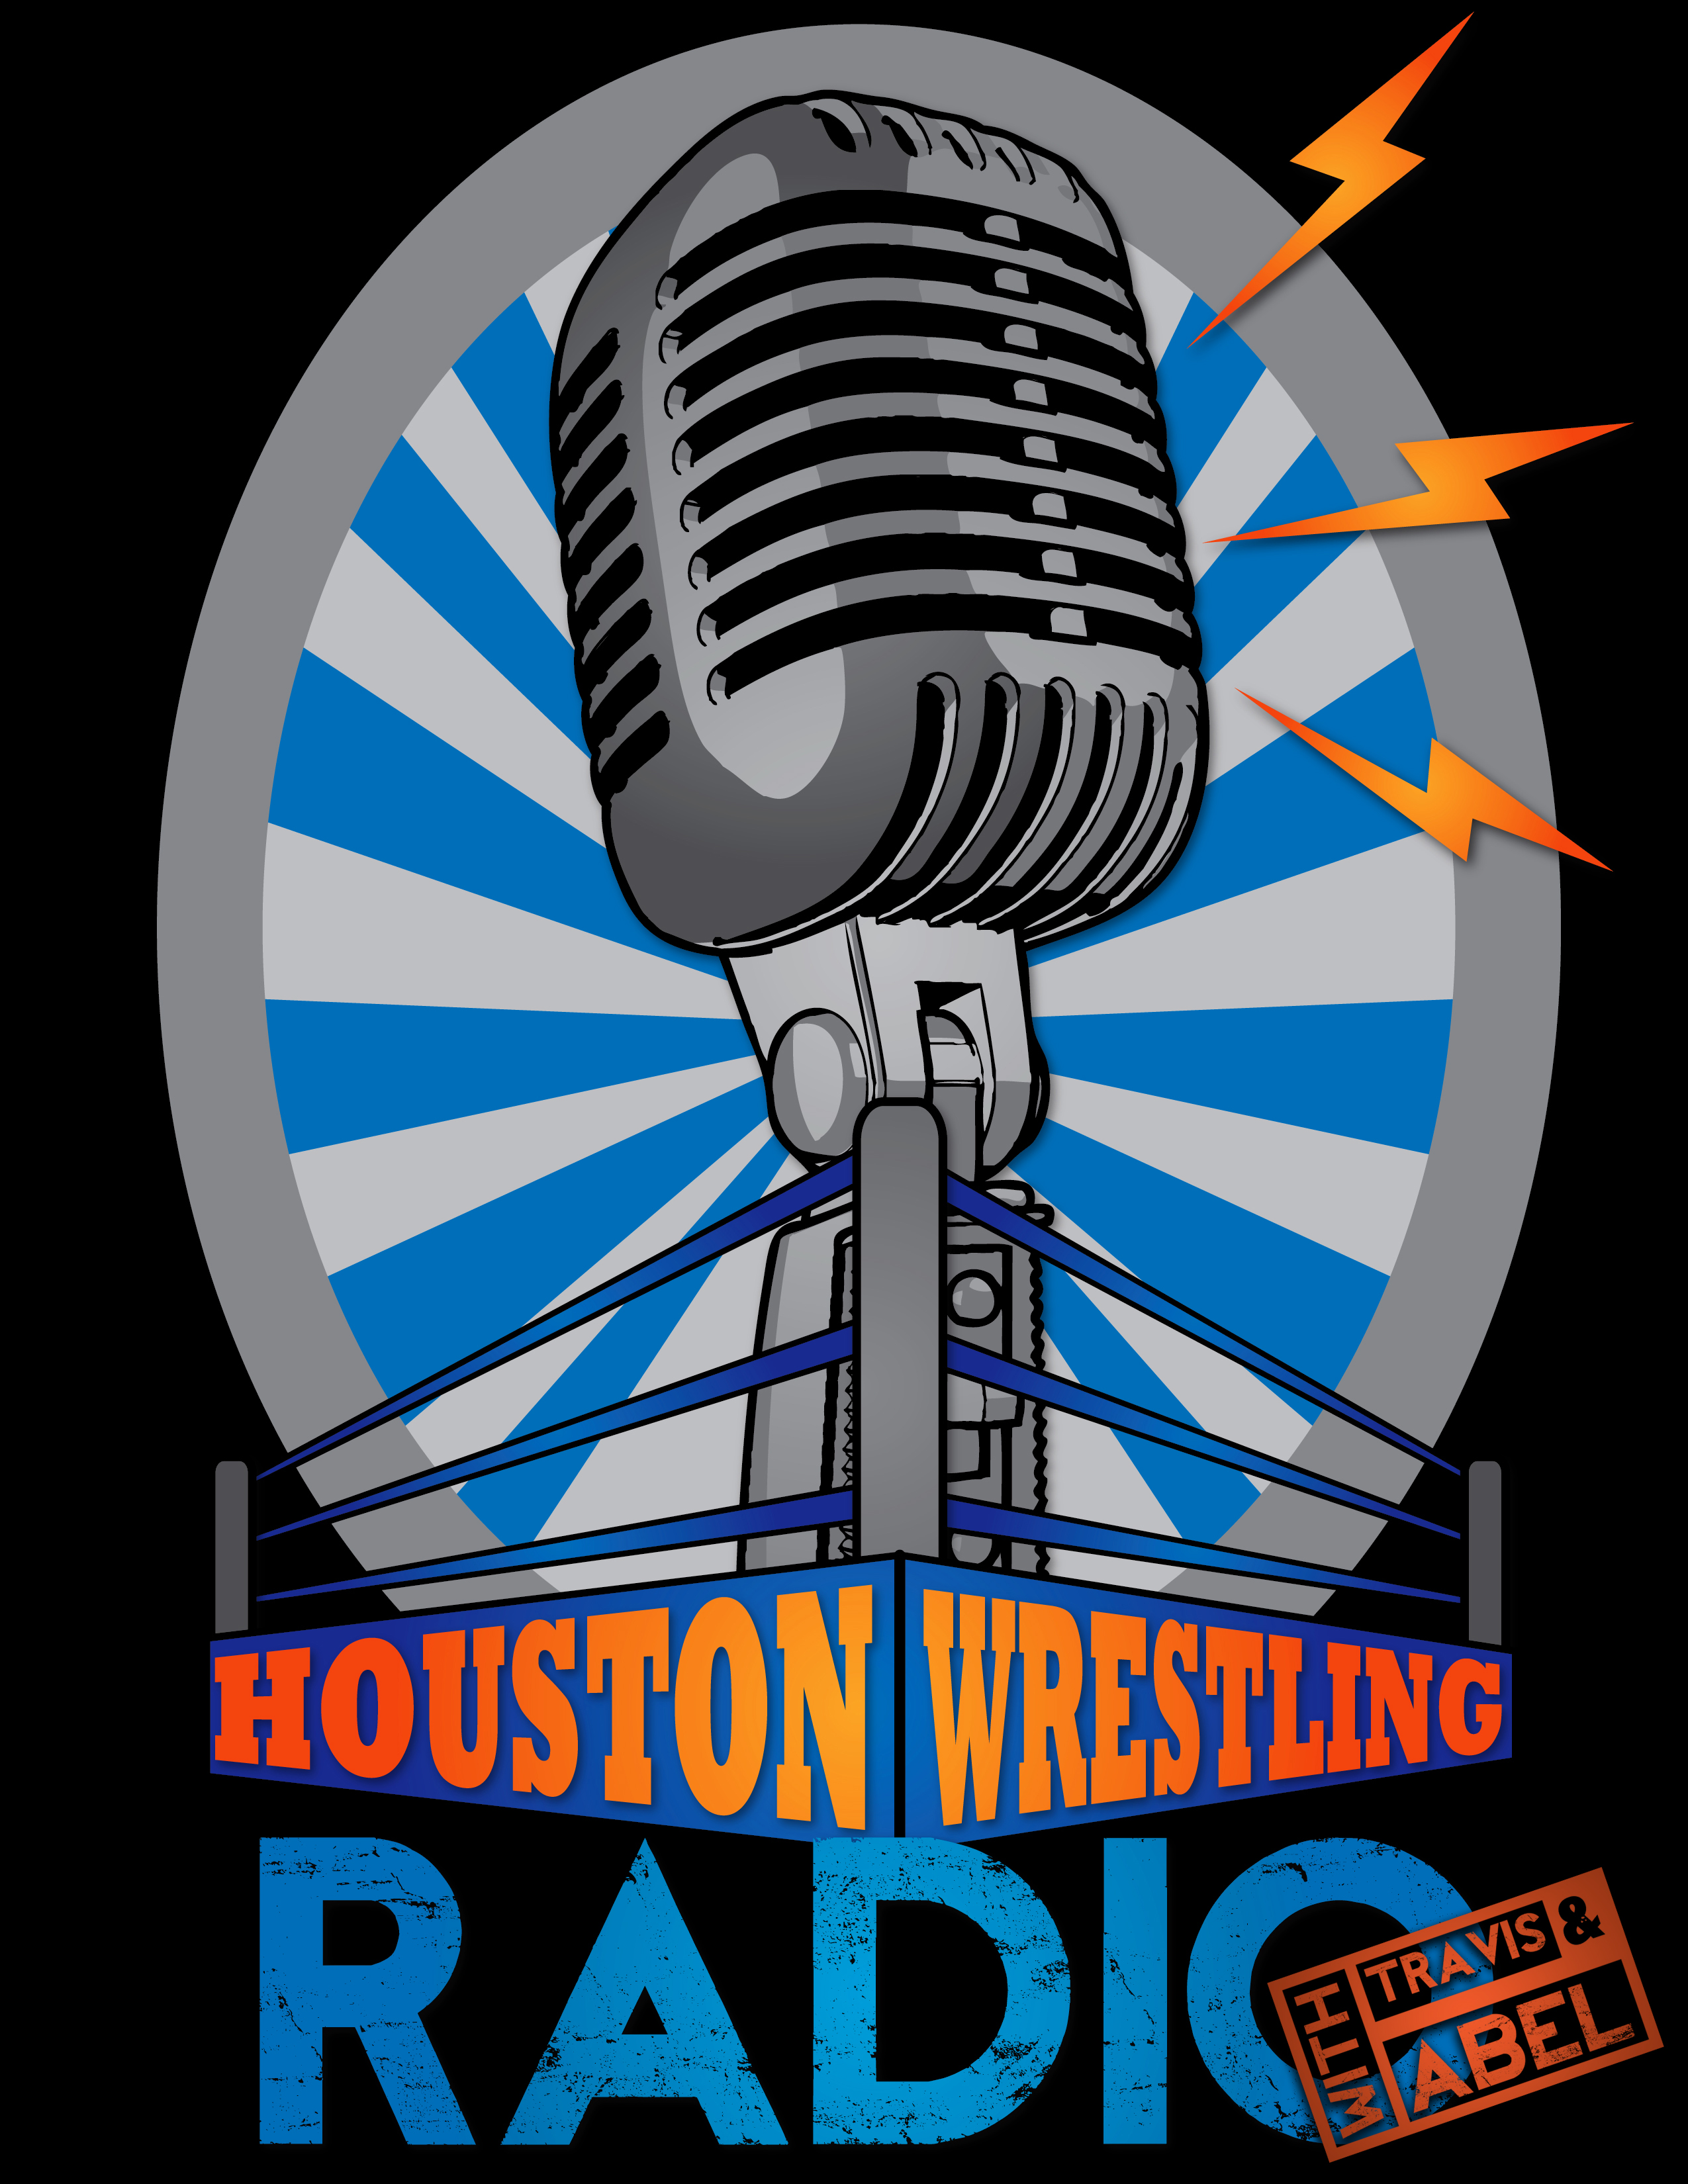 HWR #76 04/01/14 2nd Annual WrestleMania Preview Spectacular